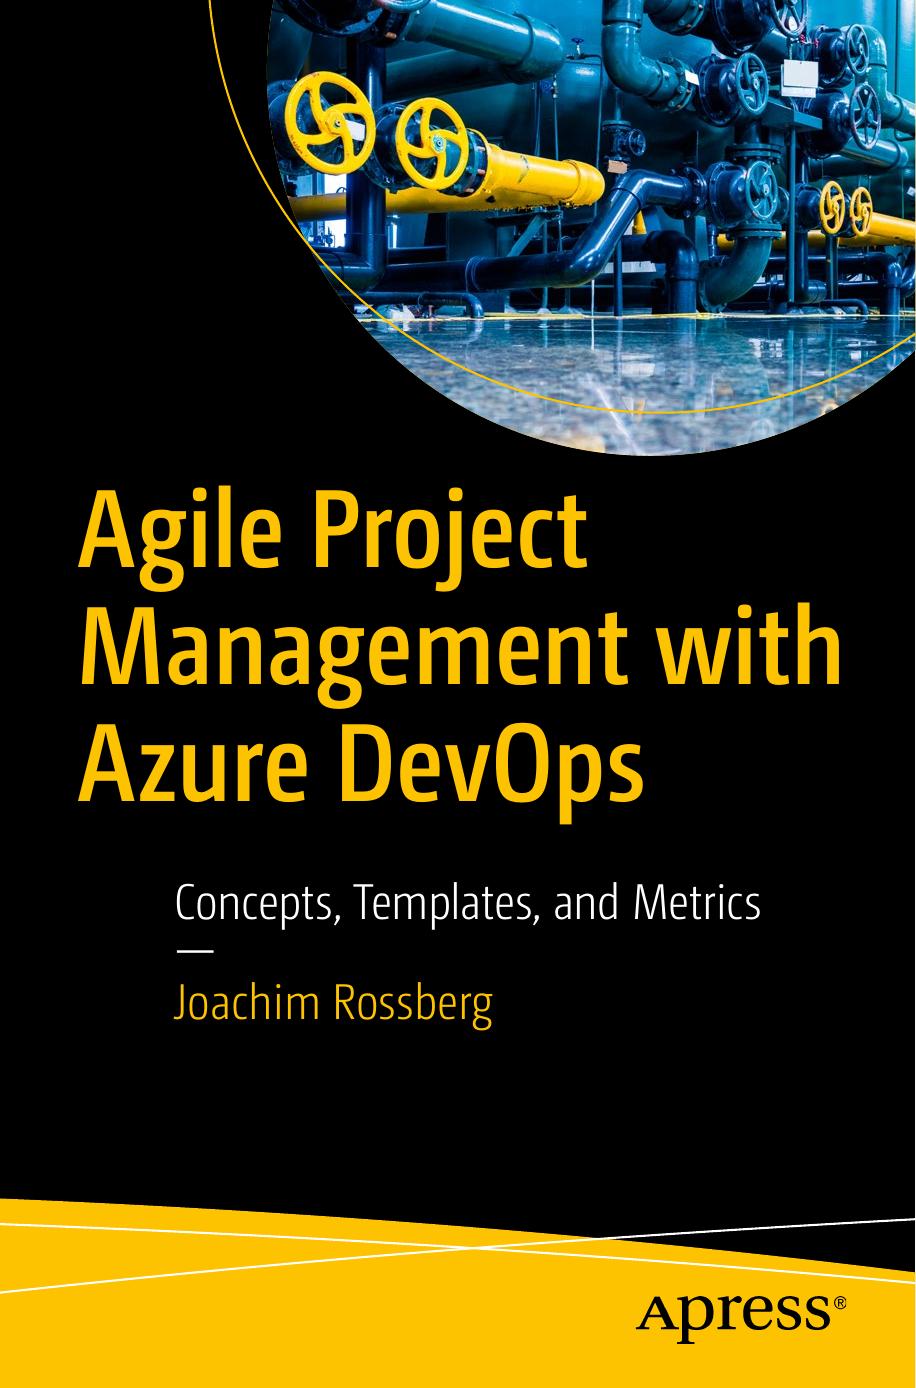 Agile Project Management with Azure DevOps  Concepts, Templates, and Metrics ( PDFDrive ) 2019